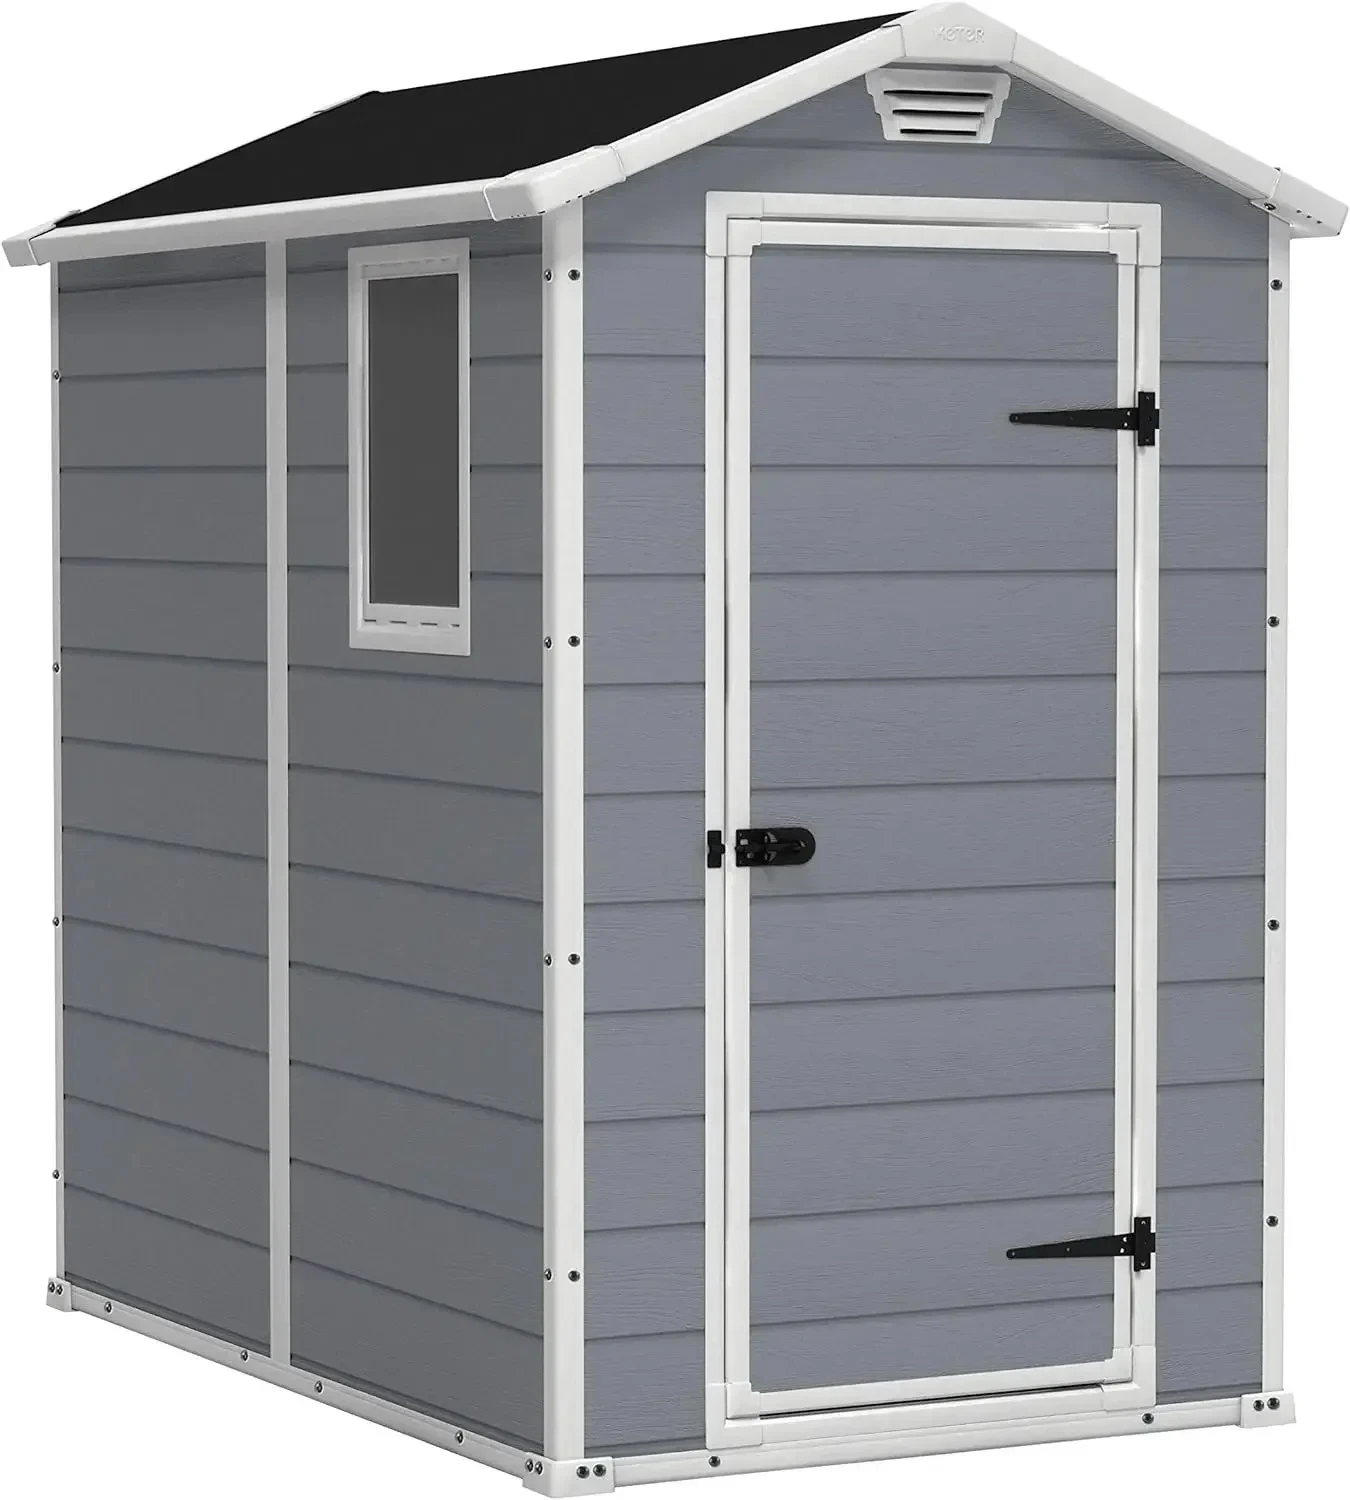 Manor 4x6 Resin Outdoor Storage Shed Kit-Perfect to Store Patio Furniture